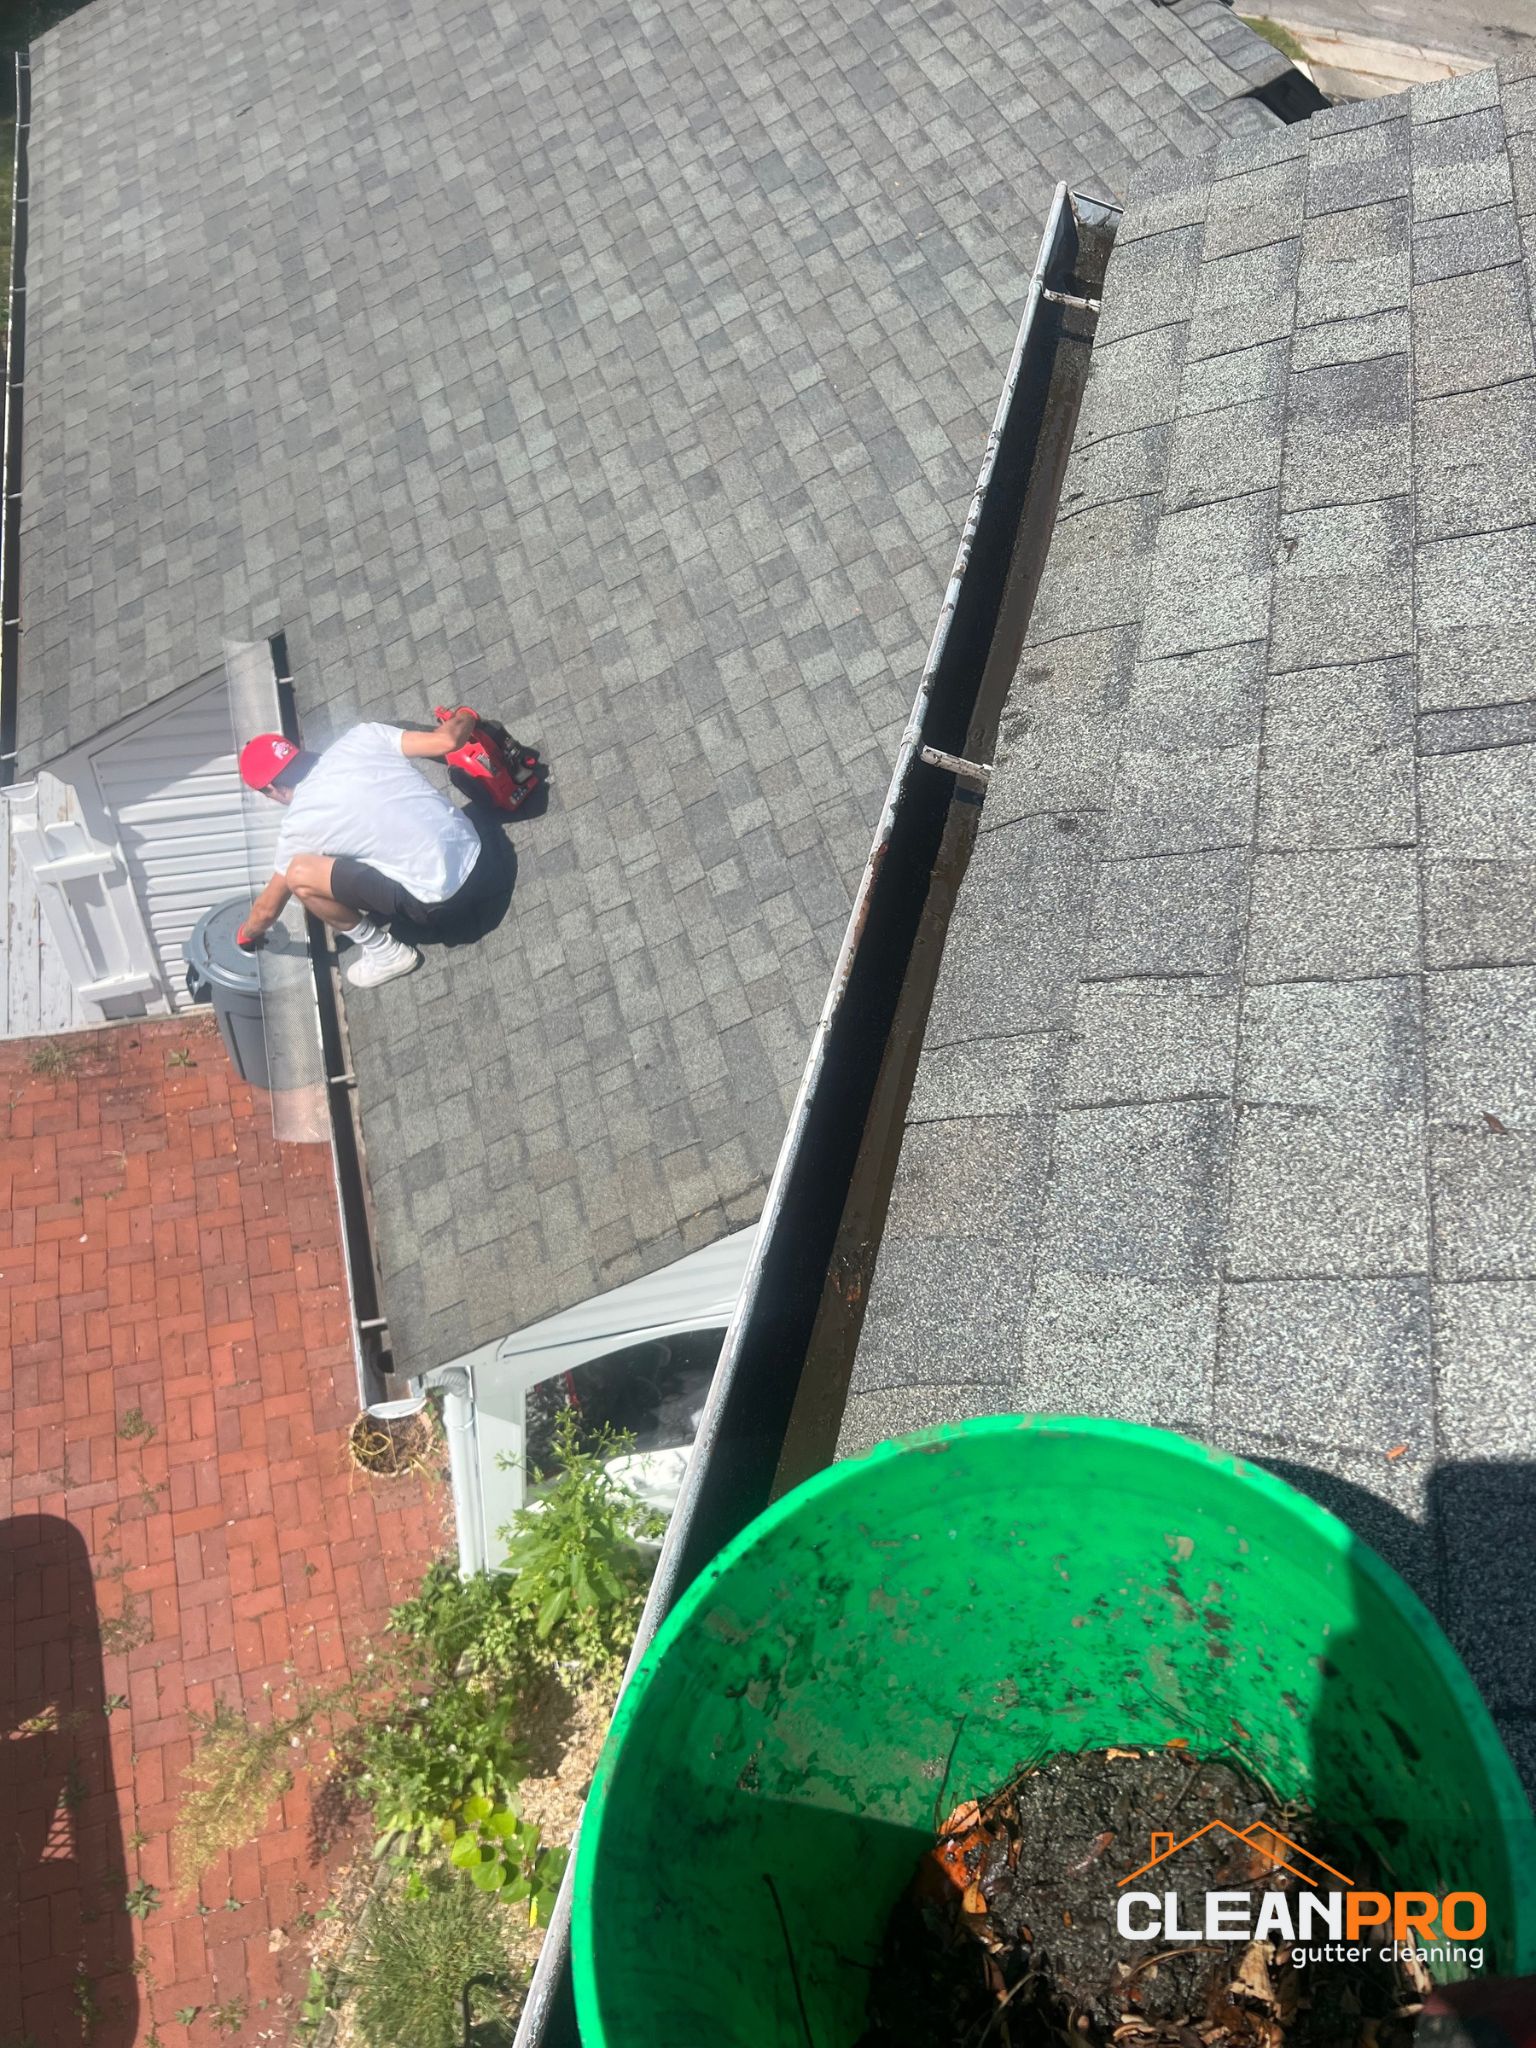 Professional Columbus Gutter Cleaners